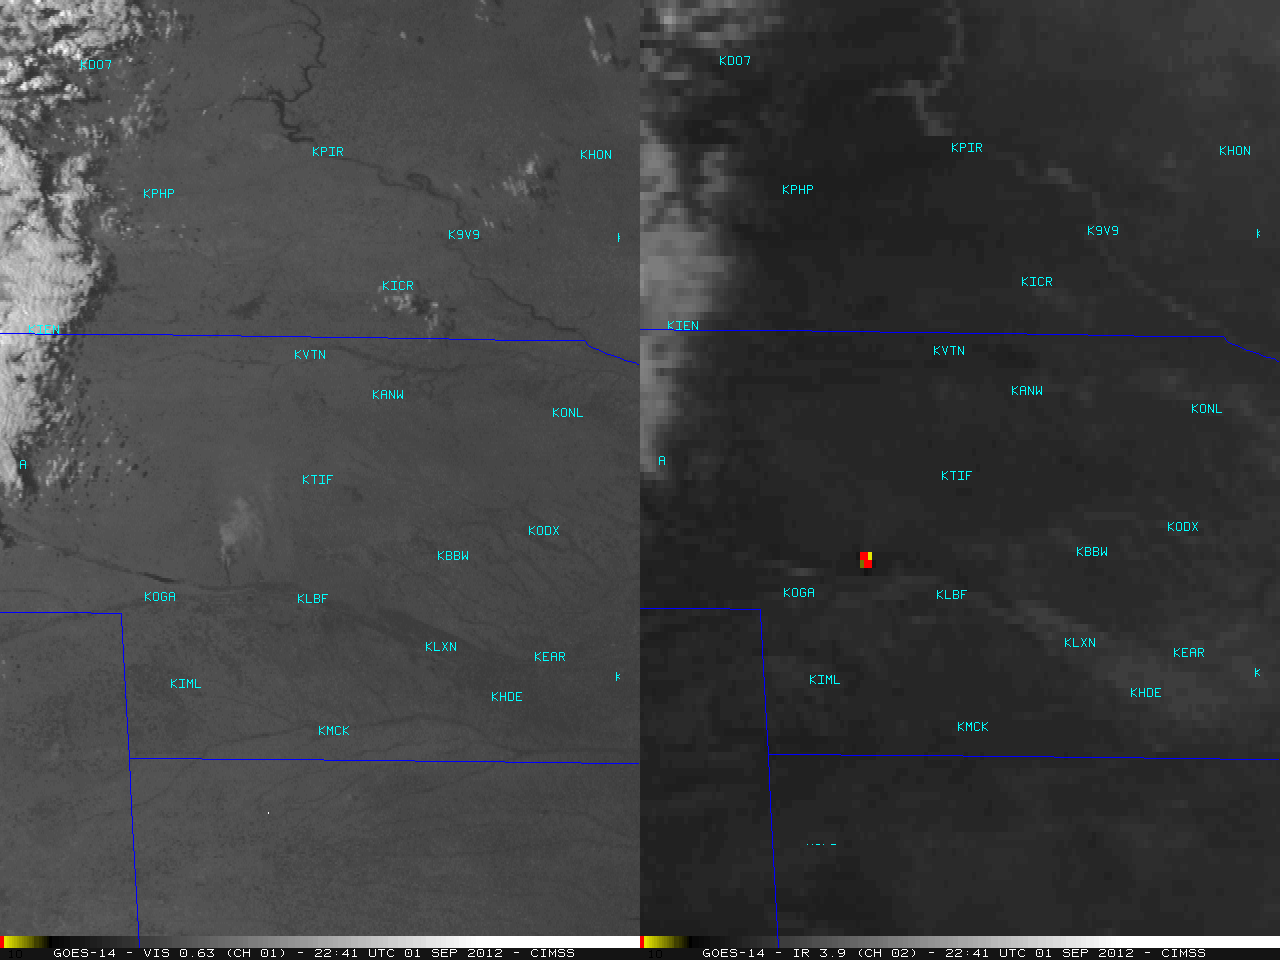 GOES-14 0.63 Âµm visible + 3.9 Âµm shortwave IR images (click image to play animation)